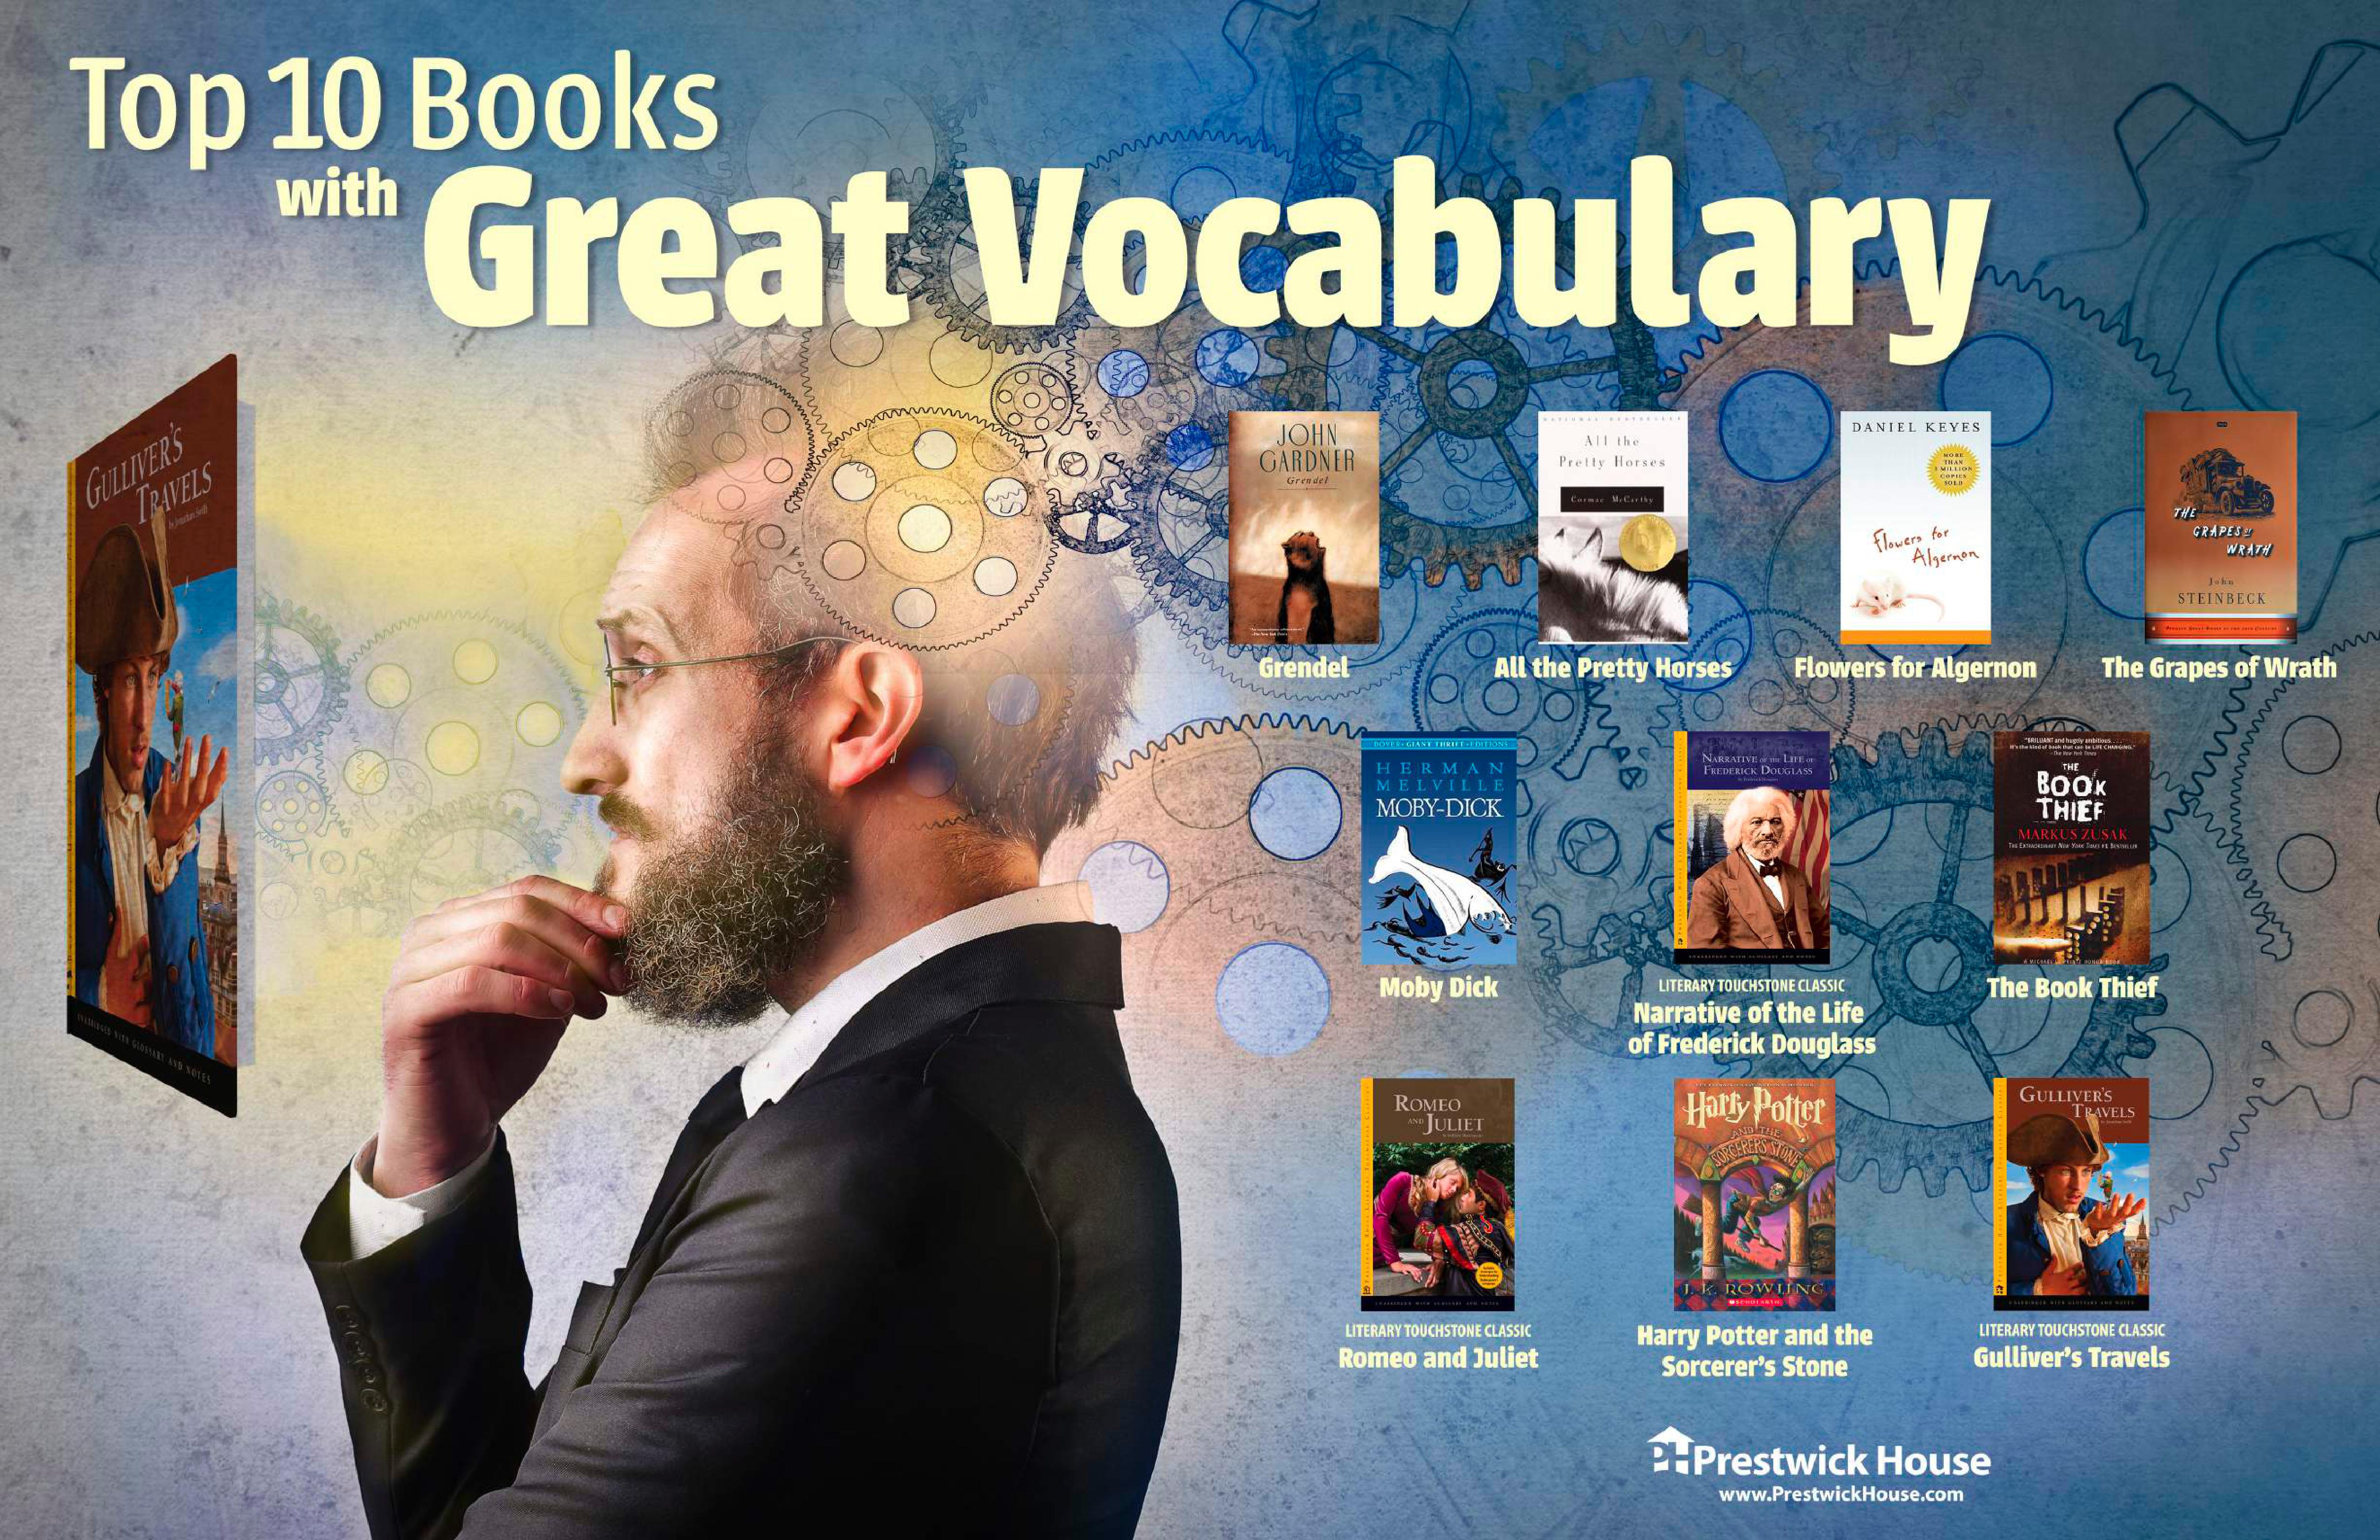 Top 10 Books with Great Vocabulary